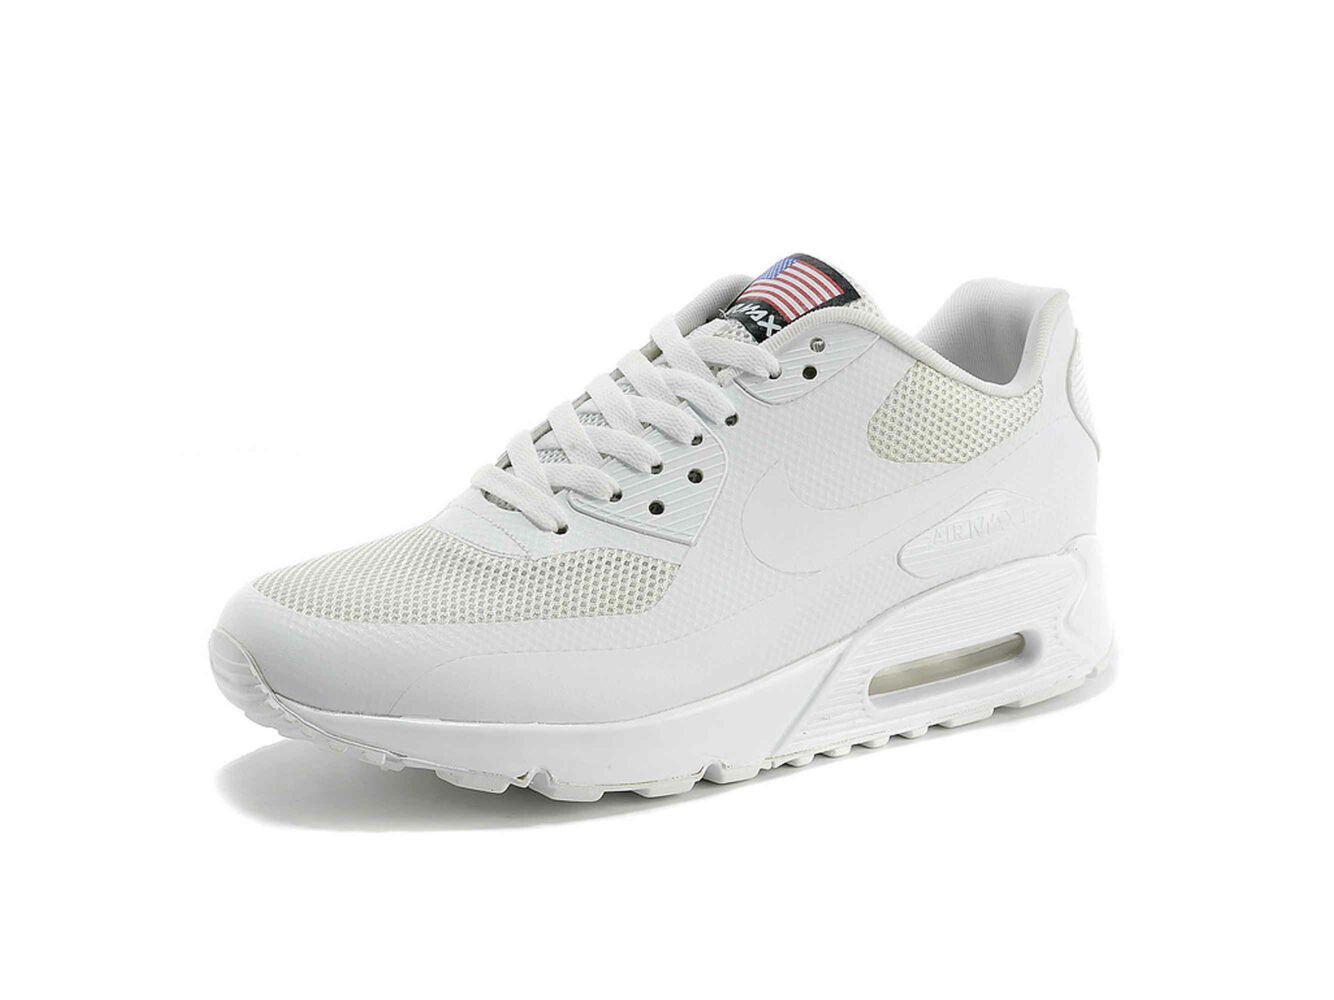 Nike Air Max 90 Hyperfuse Independence Day 2013 White Купить